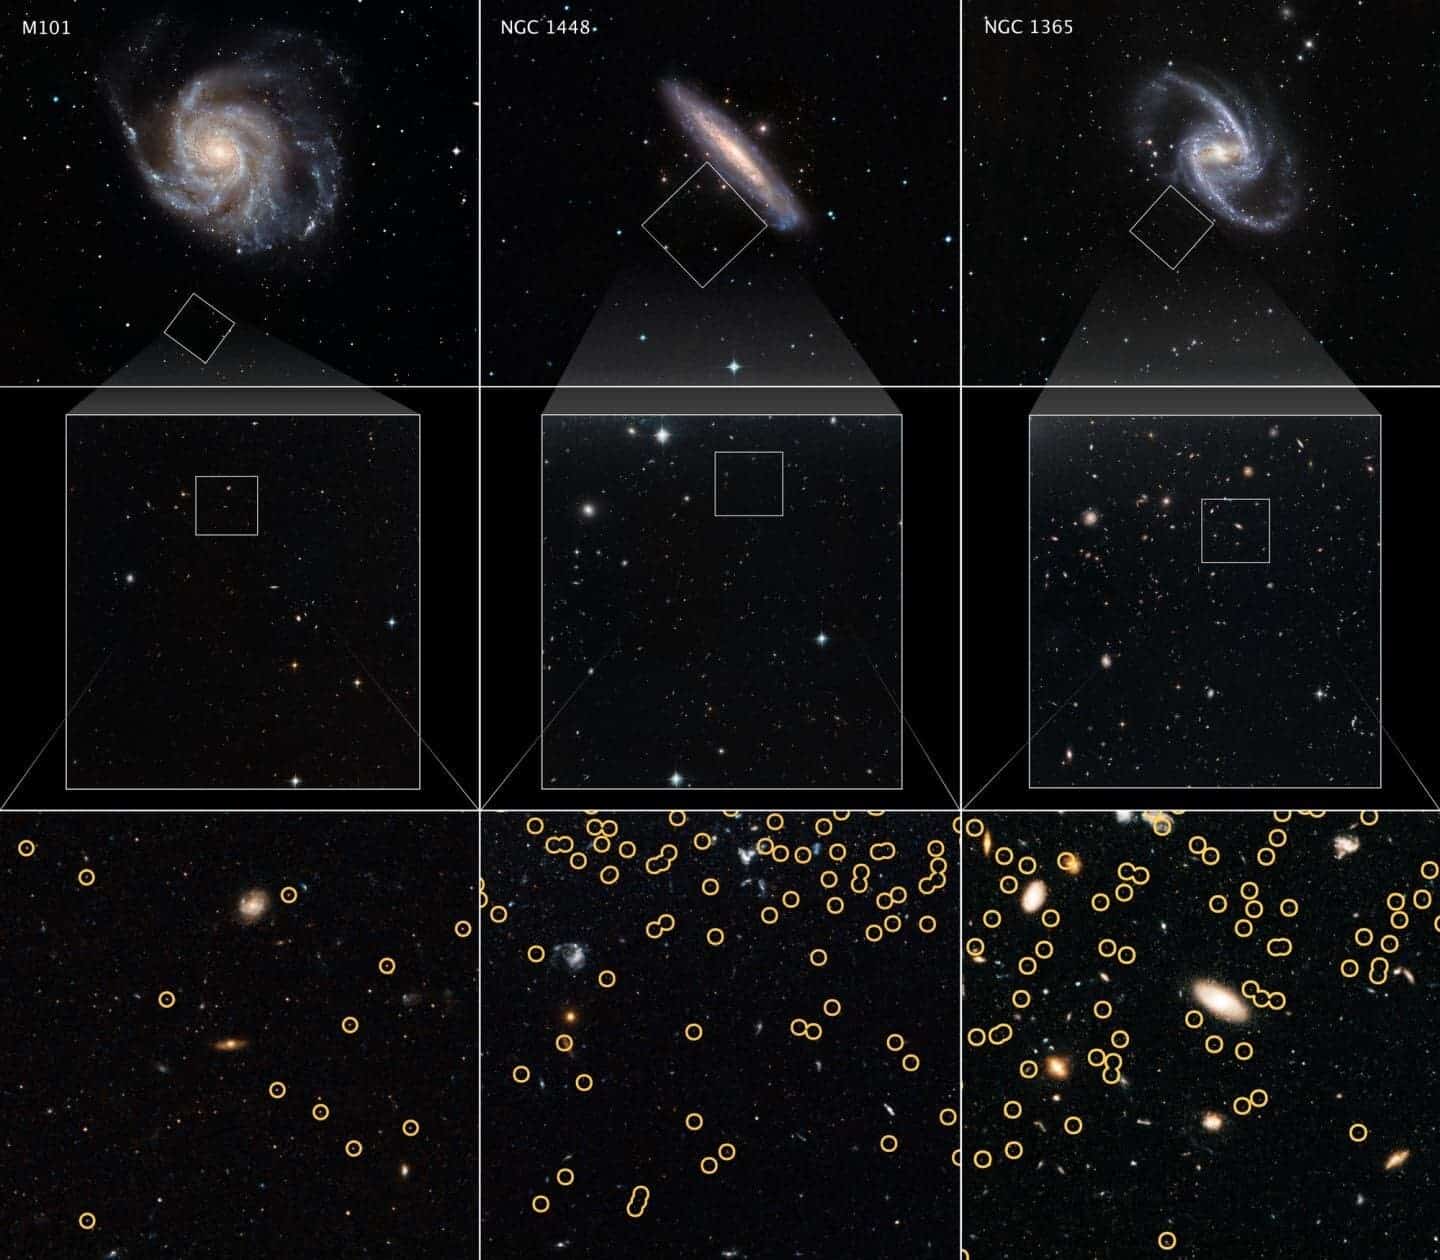 These galaxies are selected from a Hubble Space Telescope program to measure the expansion rate of the universe, called the Hubble constant. The value is calculated by comparing the galaxies' distances to the apparent rate of recession away from Earth (due to the relativistic effects of expanding space). By comparing the apparent brightnesses of the galaxies' red giant stars with nearby red giants, whose distances were measured with other methods, astronomers are able to determine how far away each of the host galaxies are. This is possible because red giants are reliable milepost markers because they all reach the same peak brightness in their late evolution. And, this can be used as a 